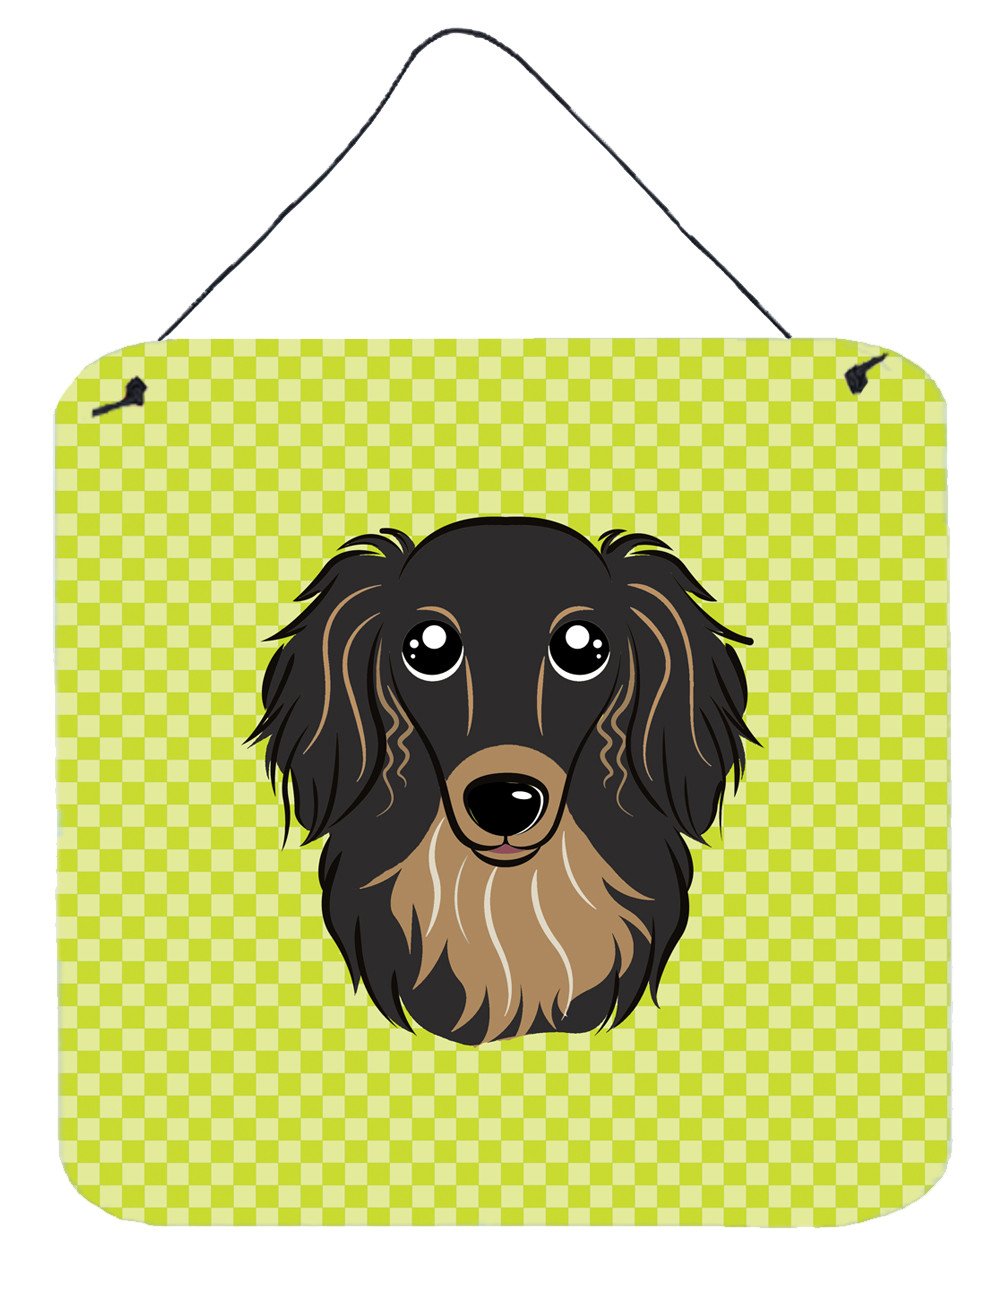 Checkerboard Lime Green Longhair Black and Tan Dachshund Wall or Door Hanging Prints BB1275DS66 by Caroline's Treasures